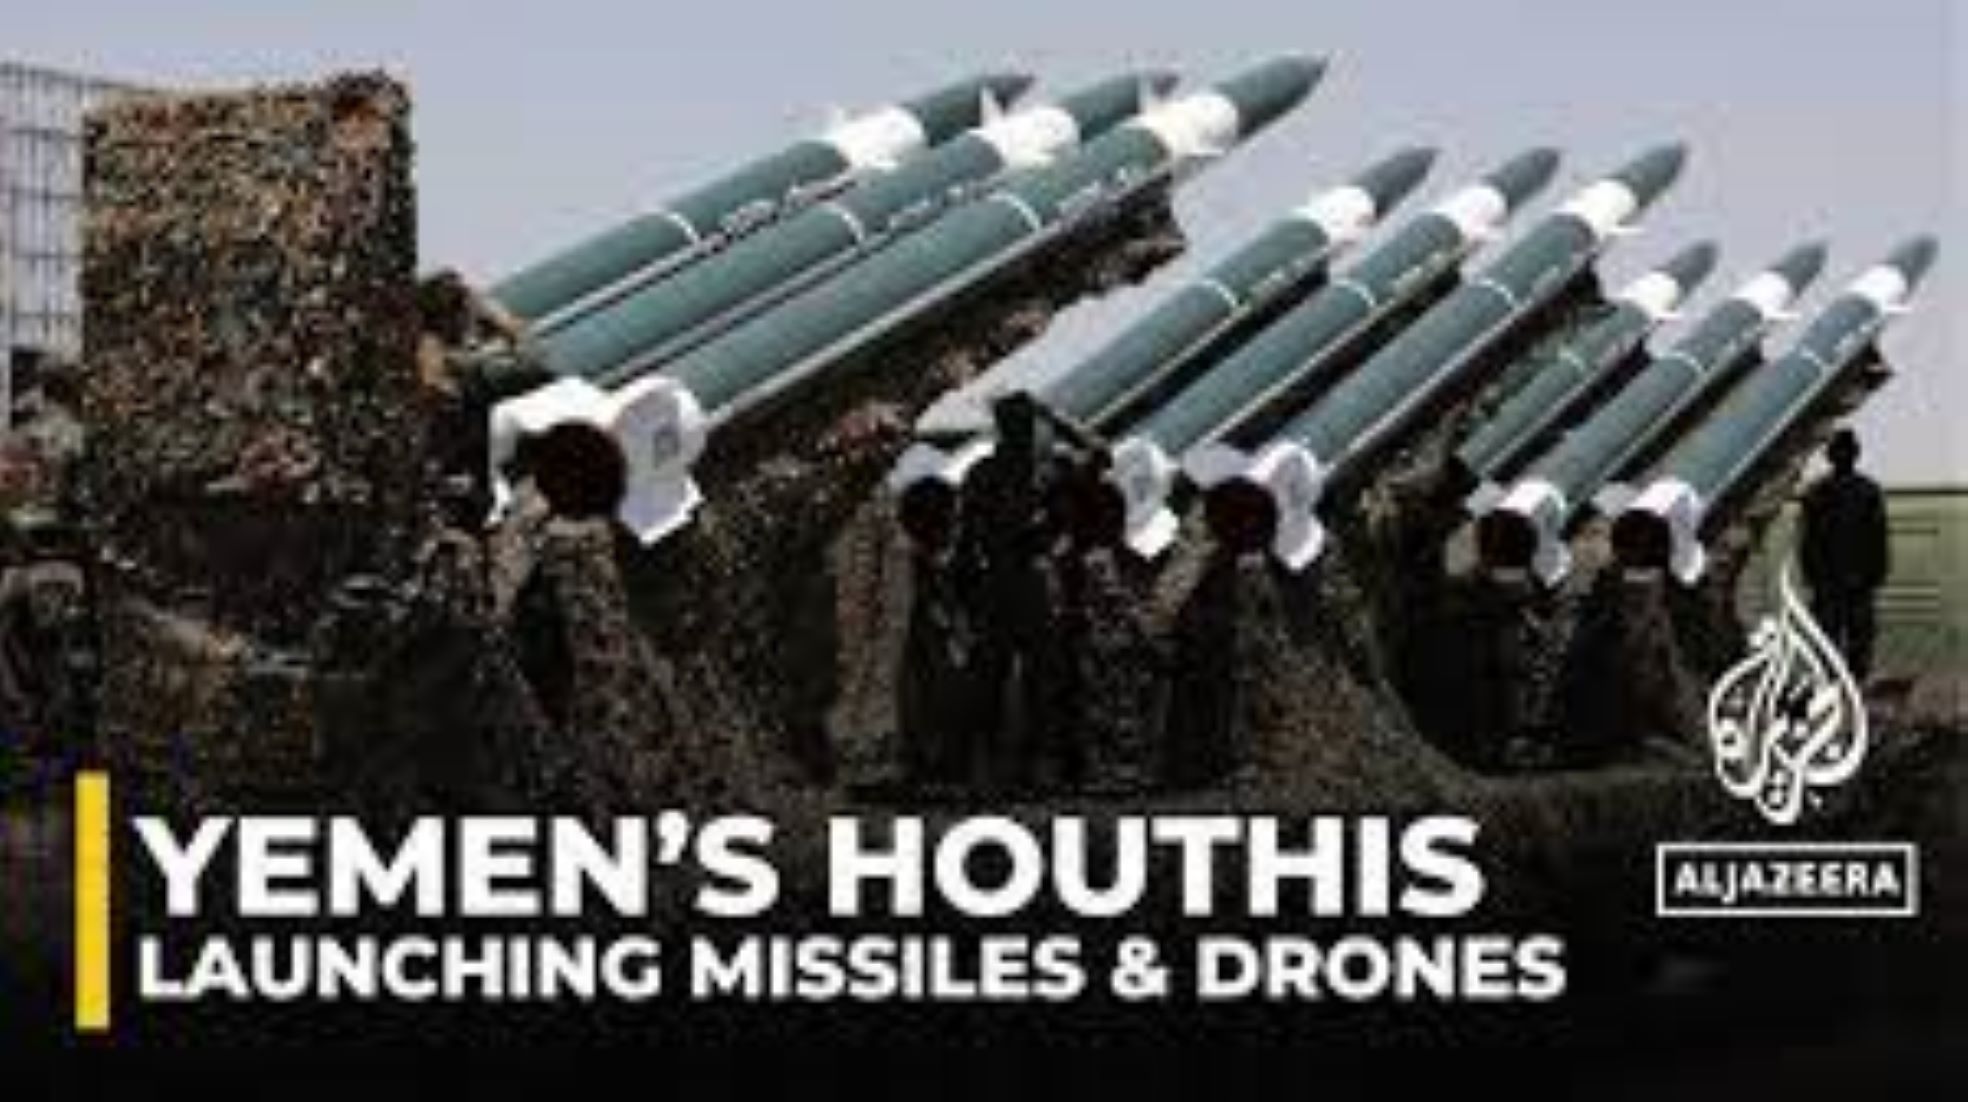 Yemen’s Houthis Say They Strike Israel With Ballistic Missiles